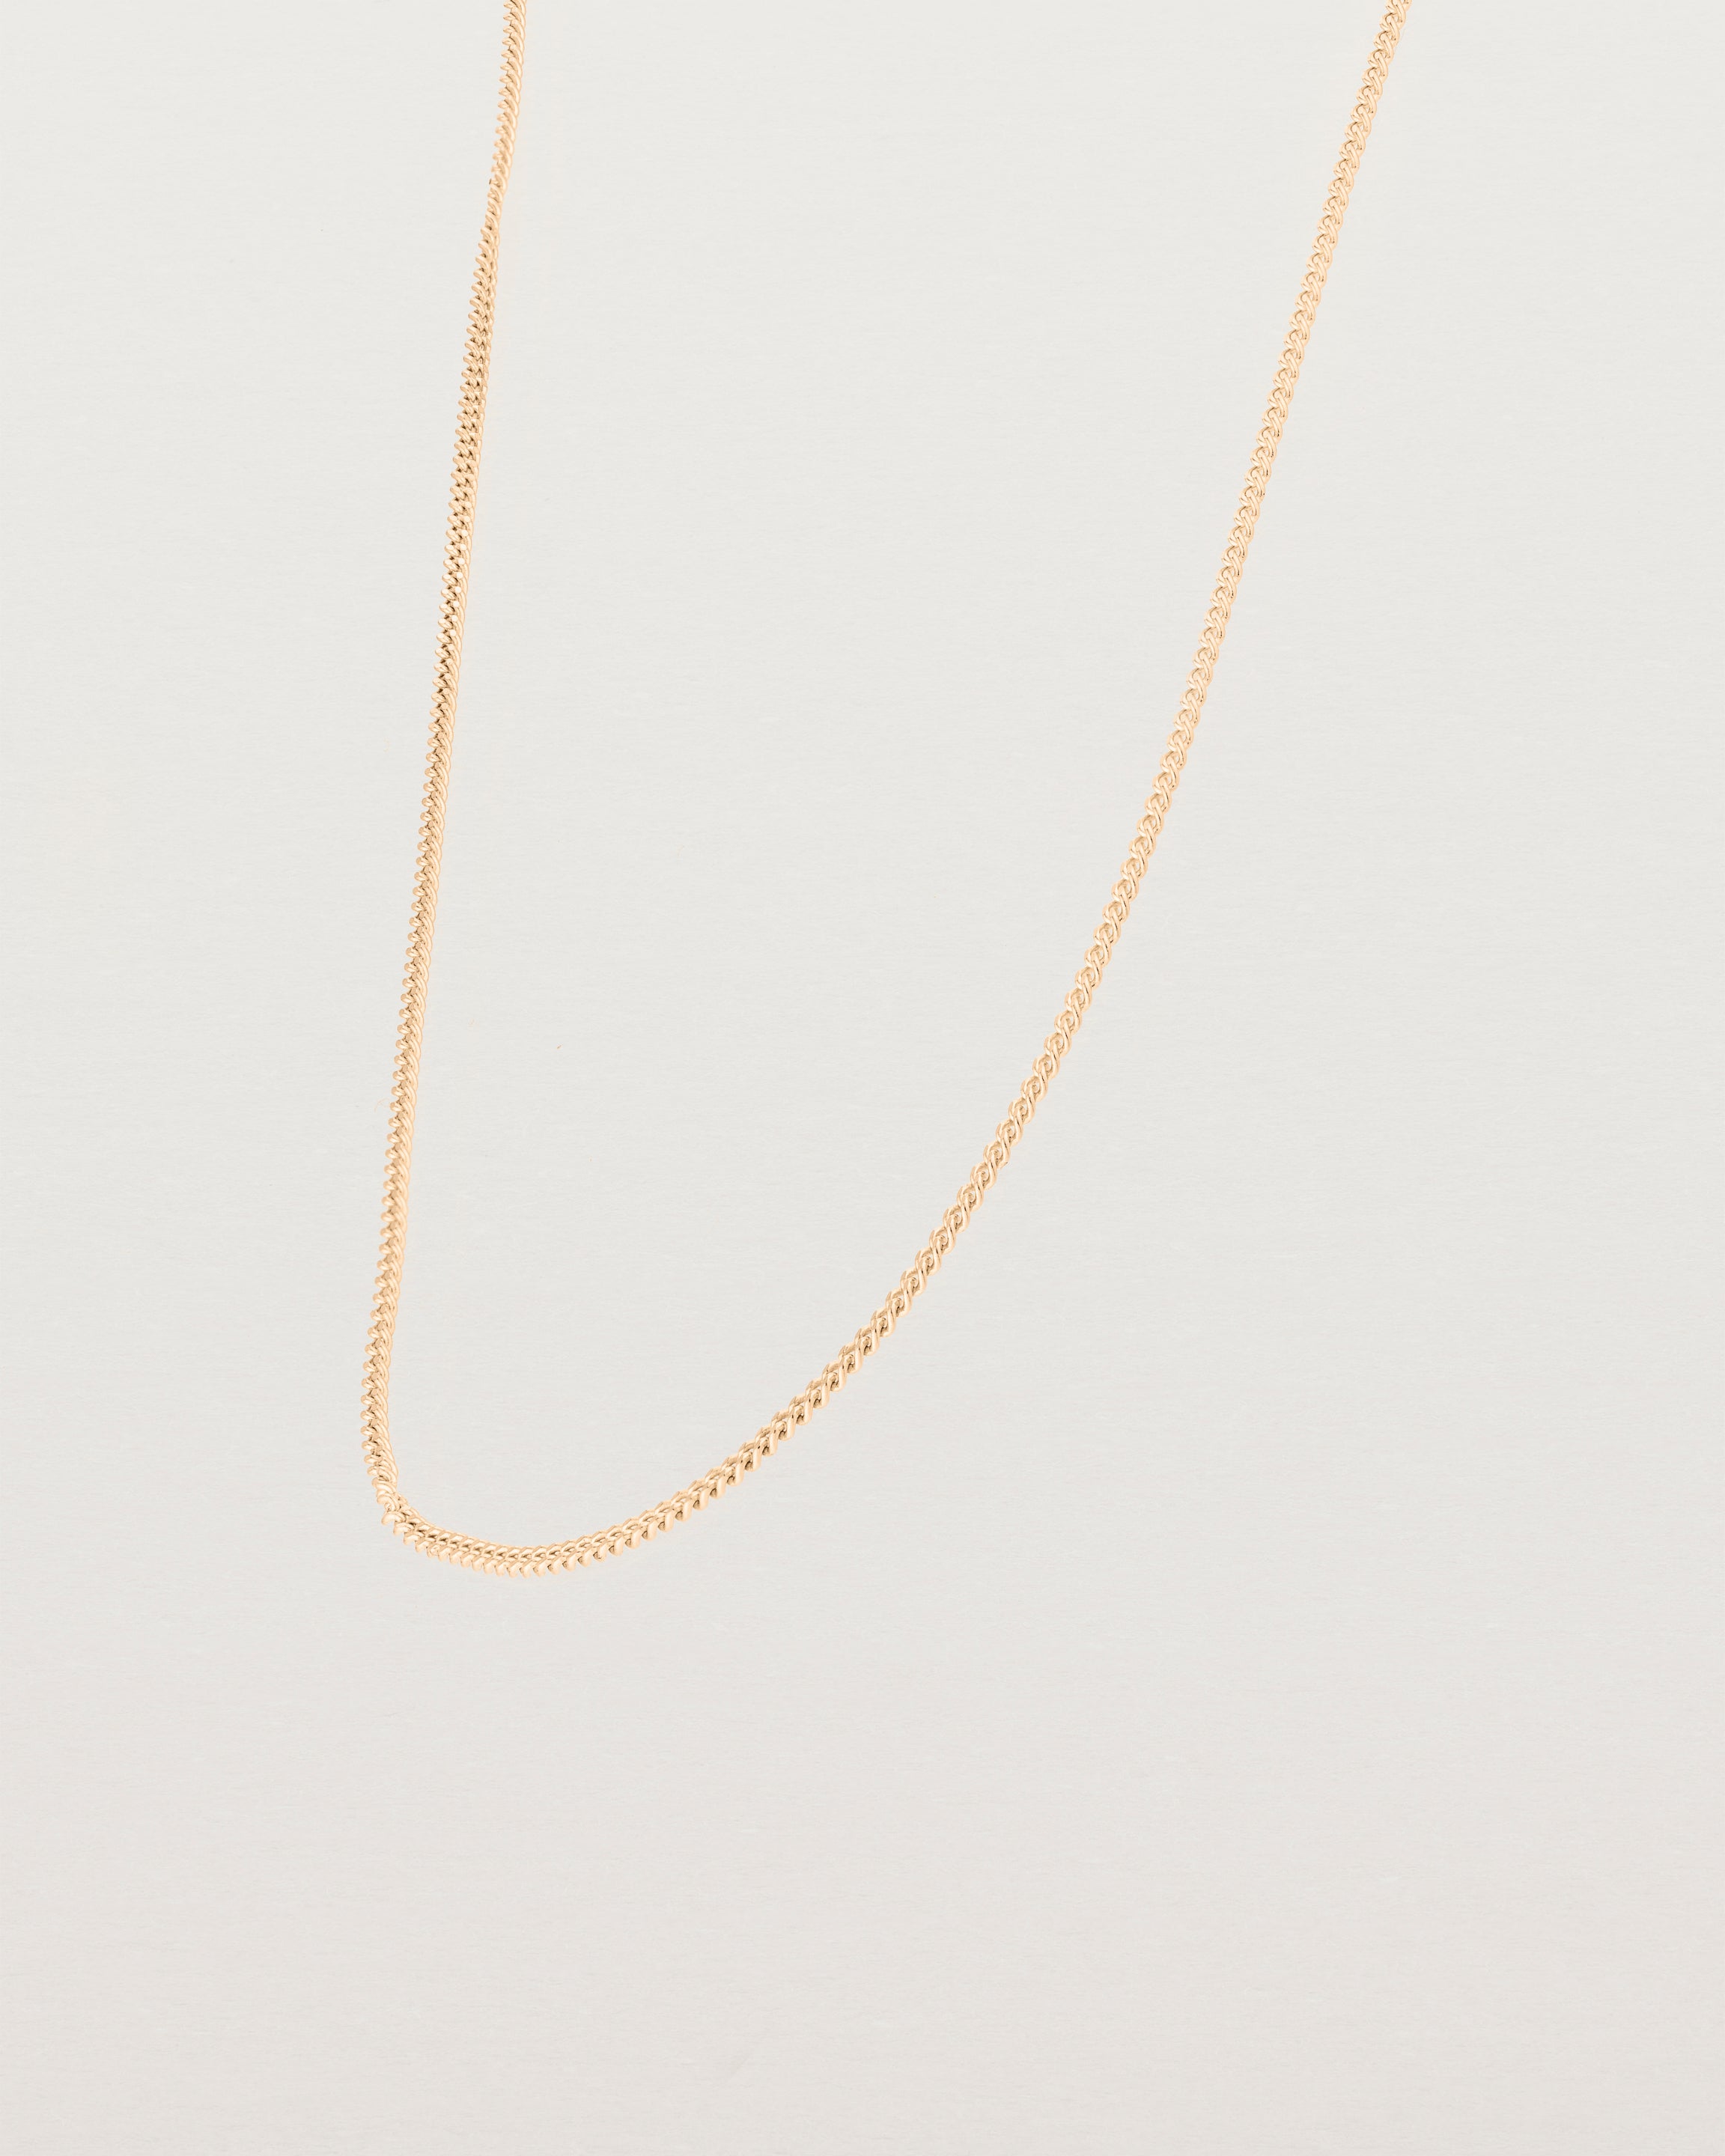 Angled view of the Simple Chain Necklace | Rose Gold